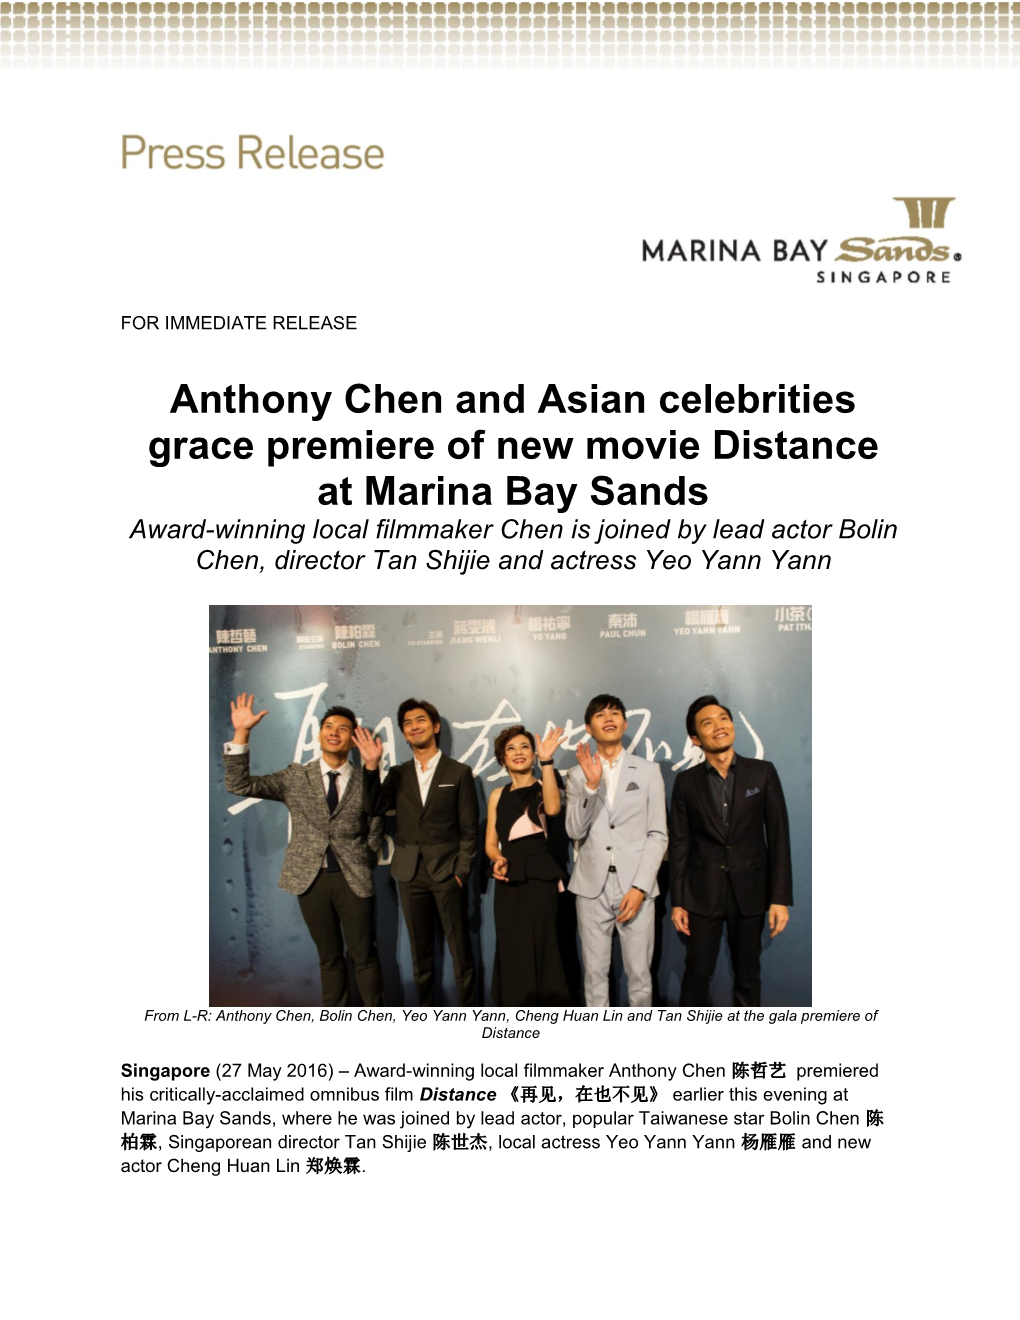 Anthony Chen and Asian Celebrities Grace Premiere of Distance At